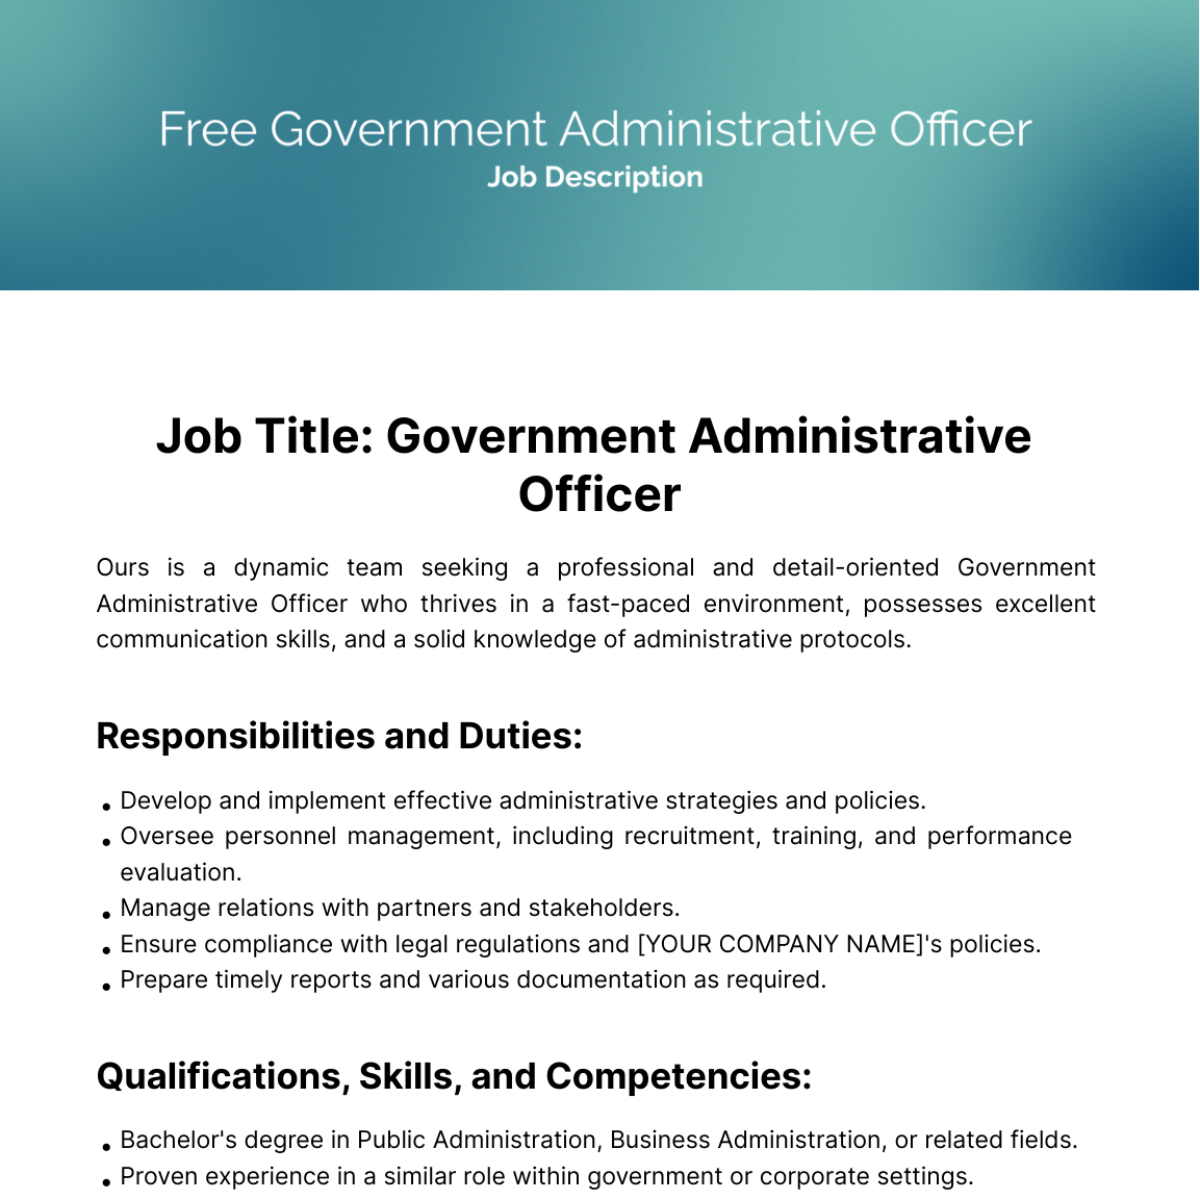 Free Government Administrative Officer Job Description Template